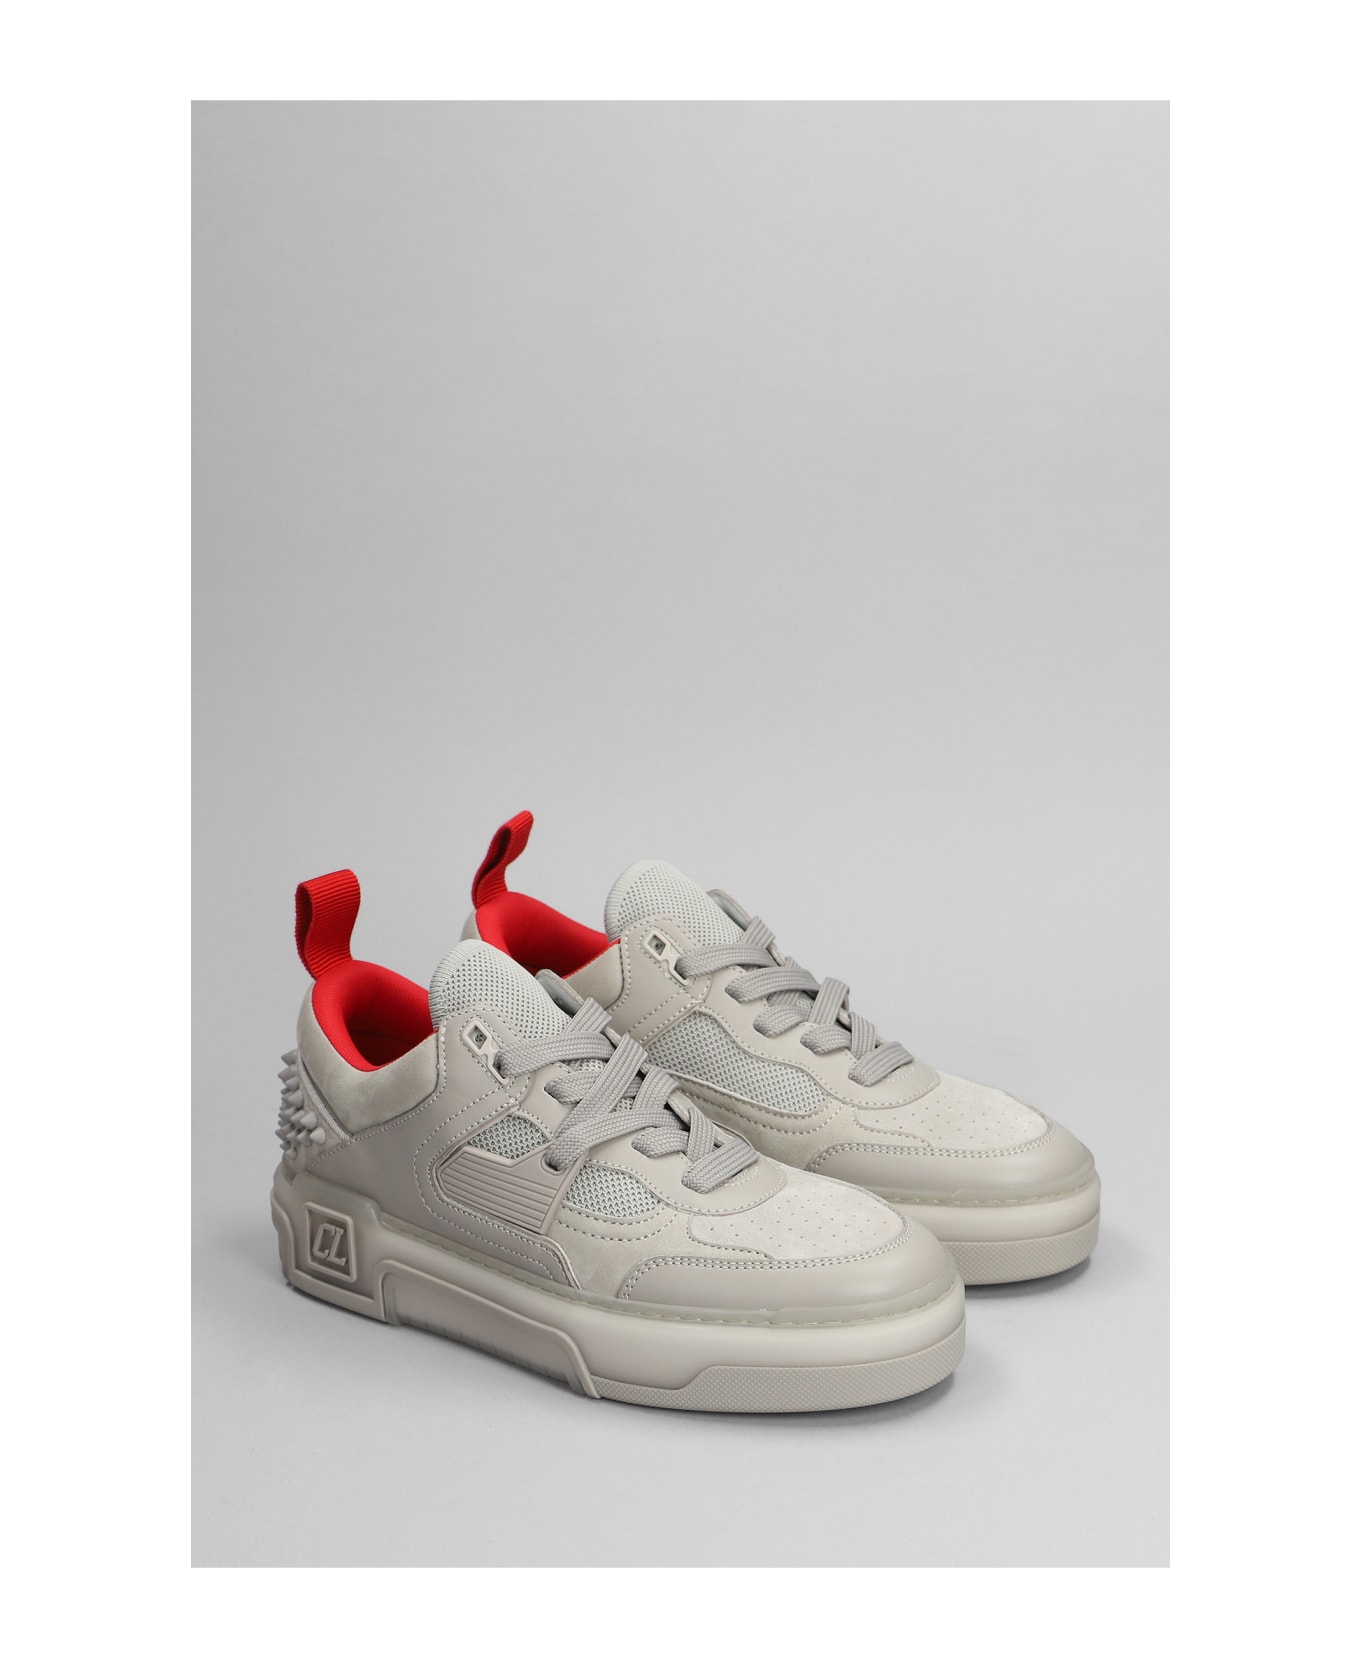 Christian Louboutin Astroloubi Sneakers In Grey Suede And Leather - grey スニーカー